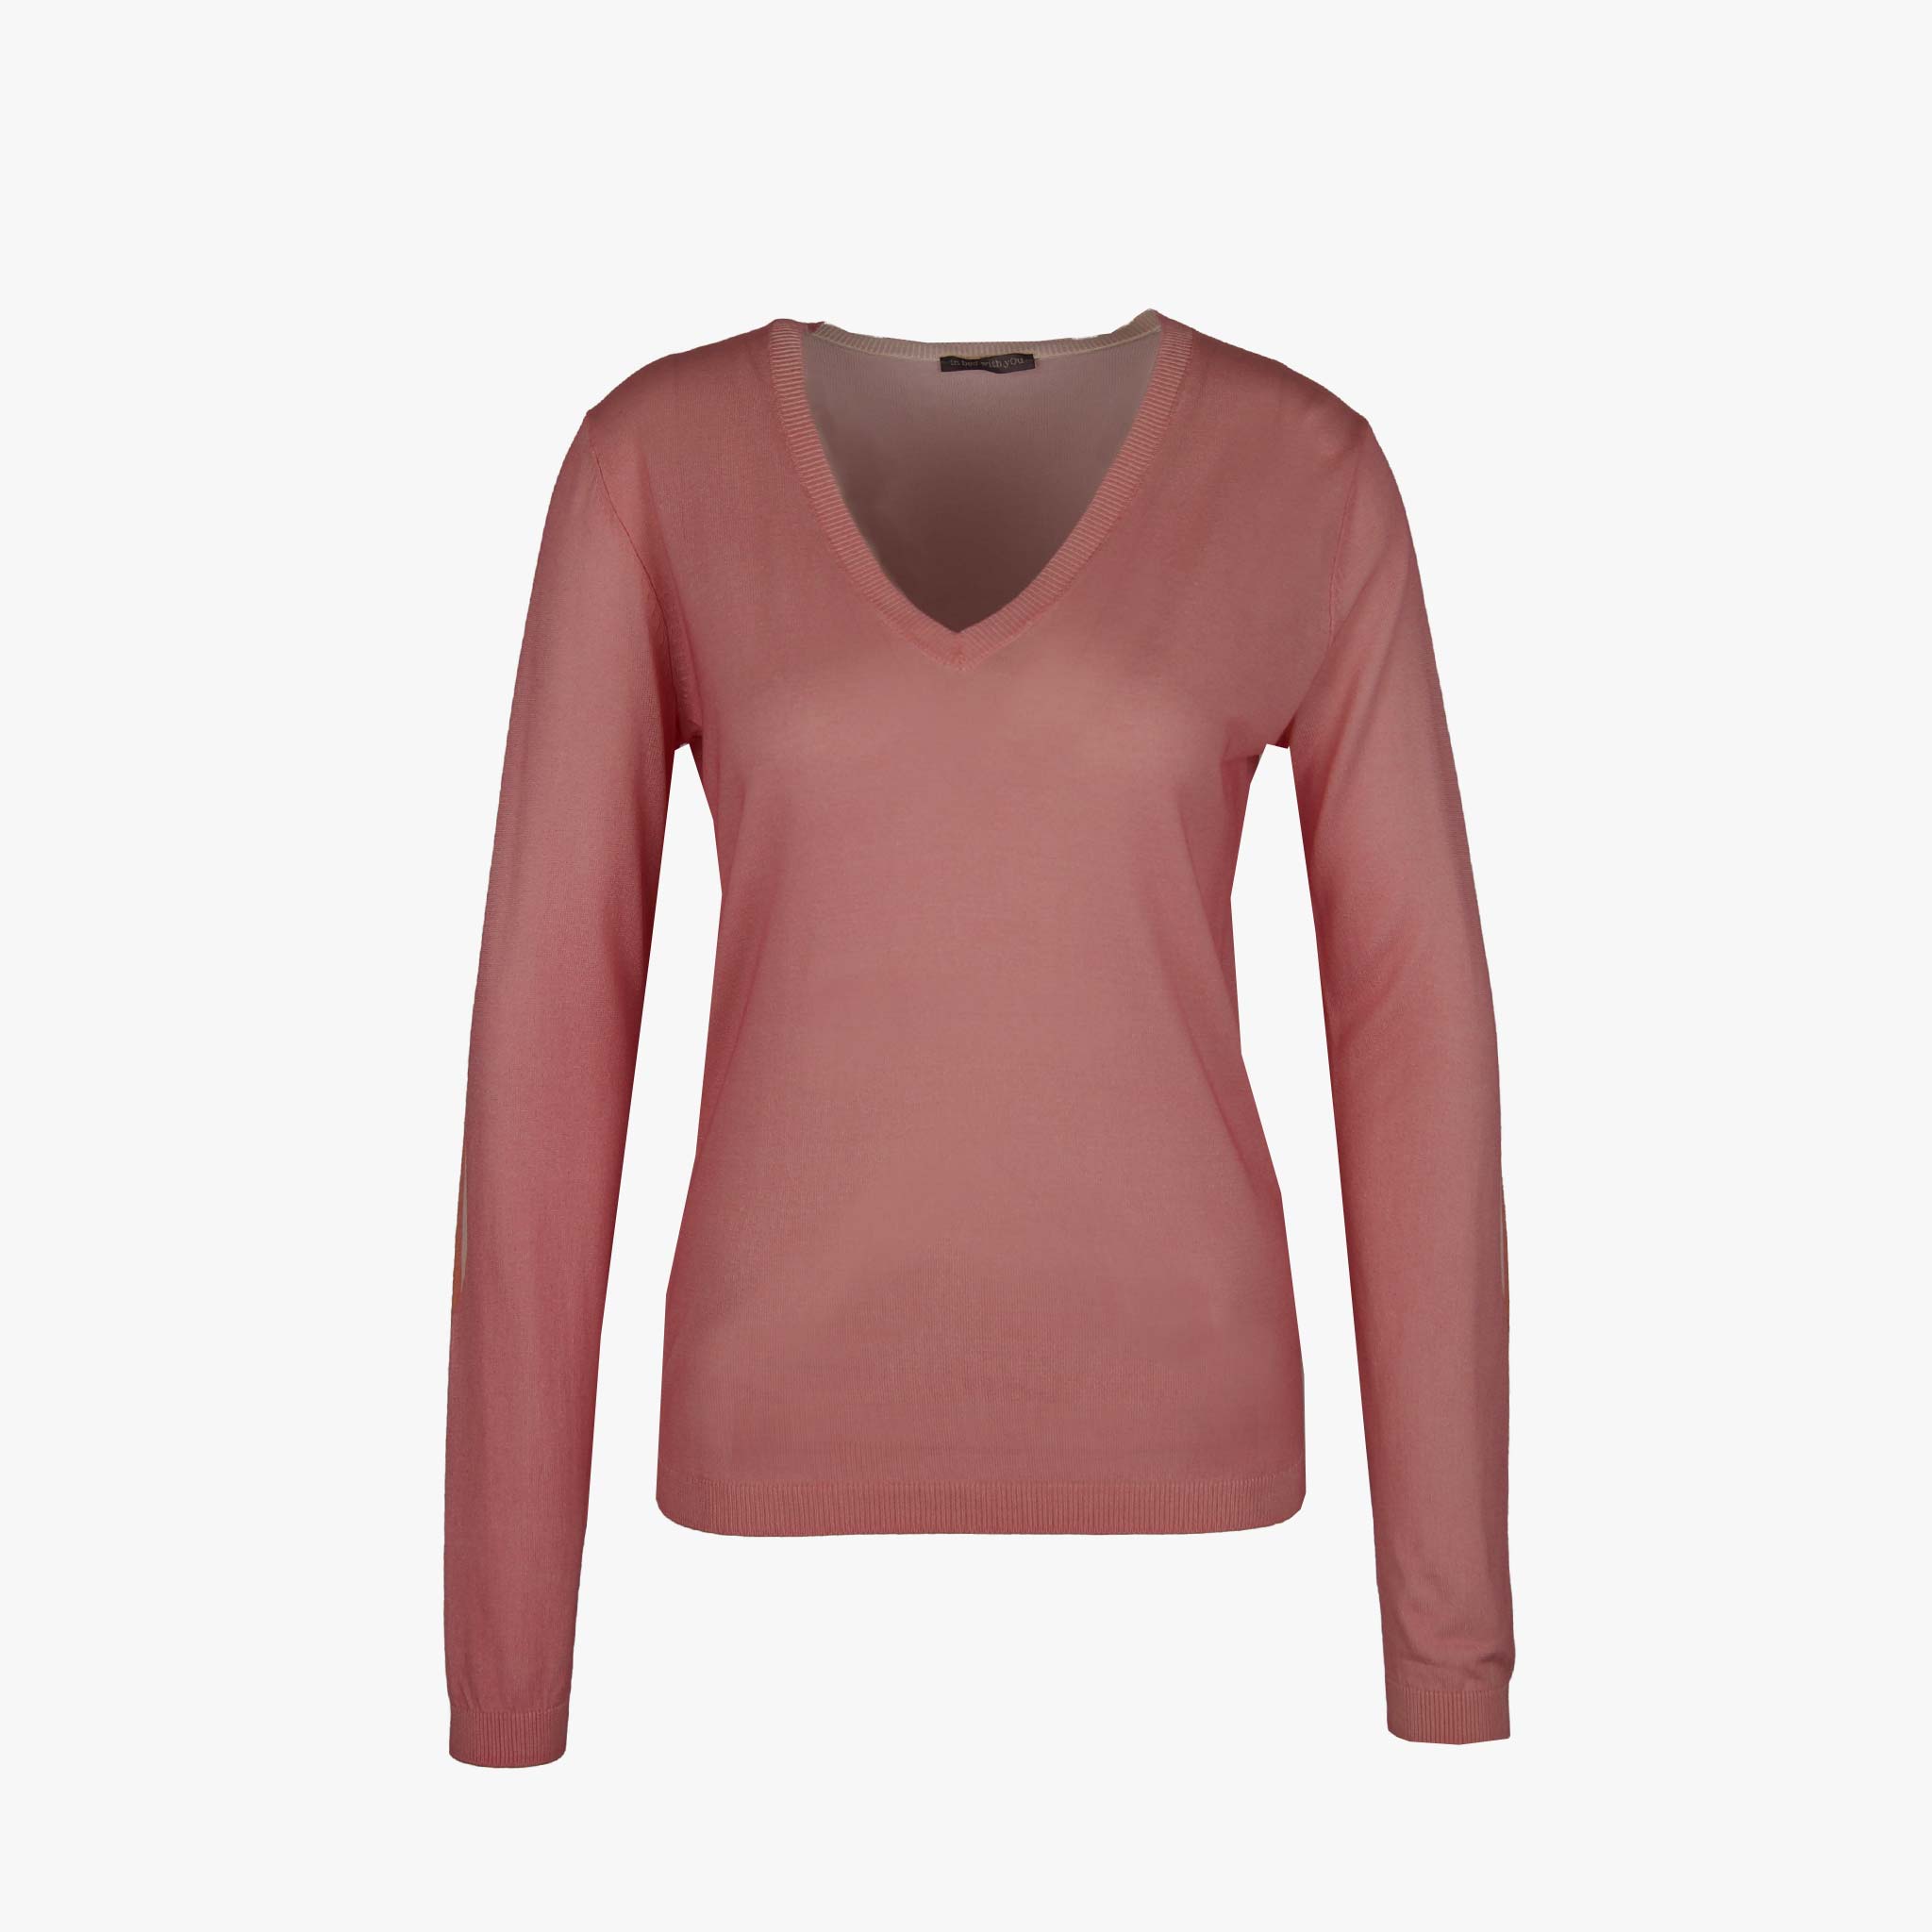 In bed with You V-Pulli | rose